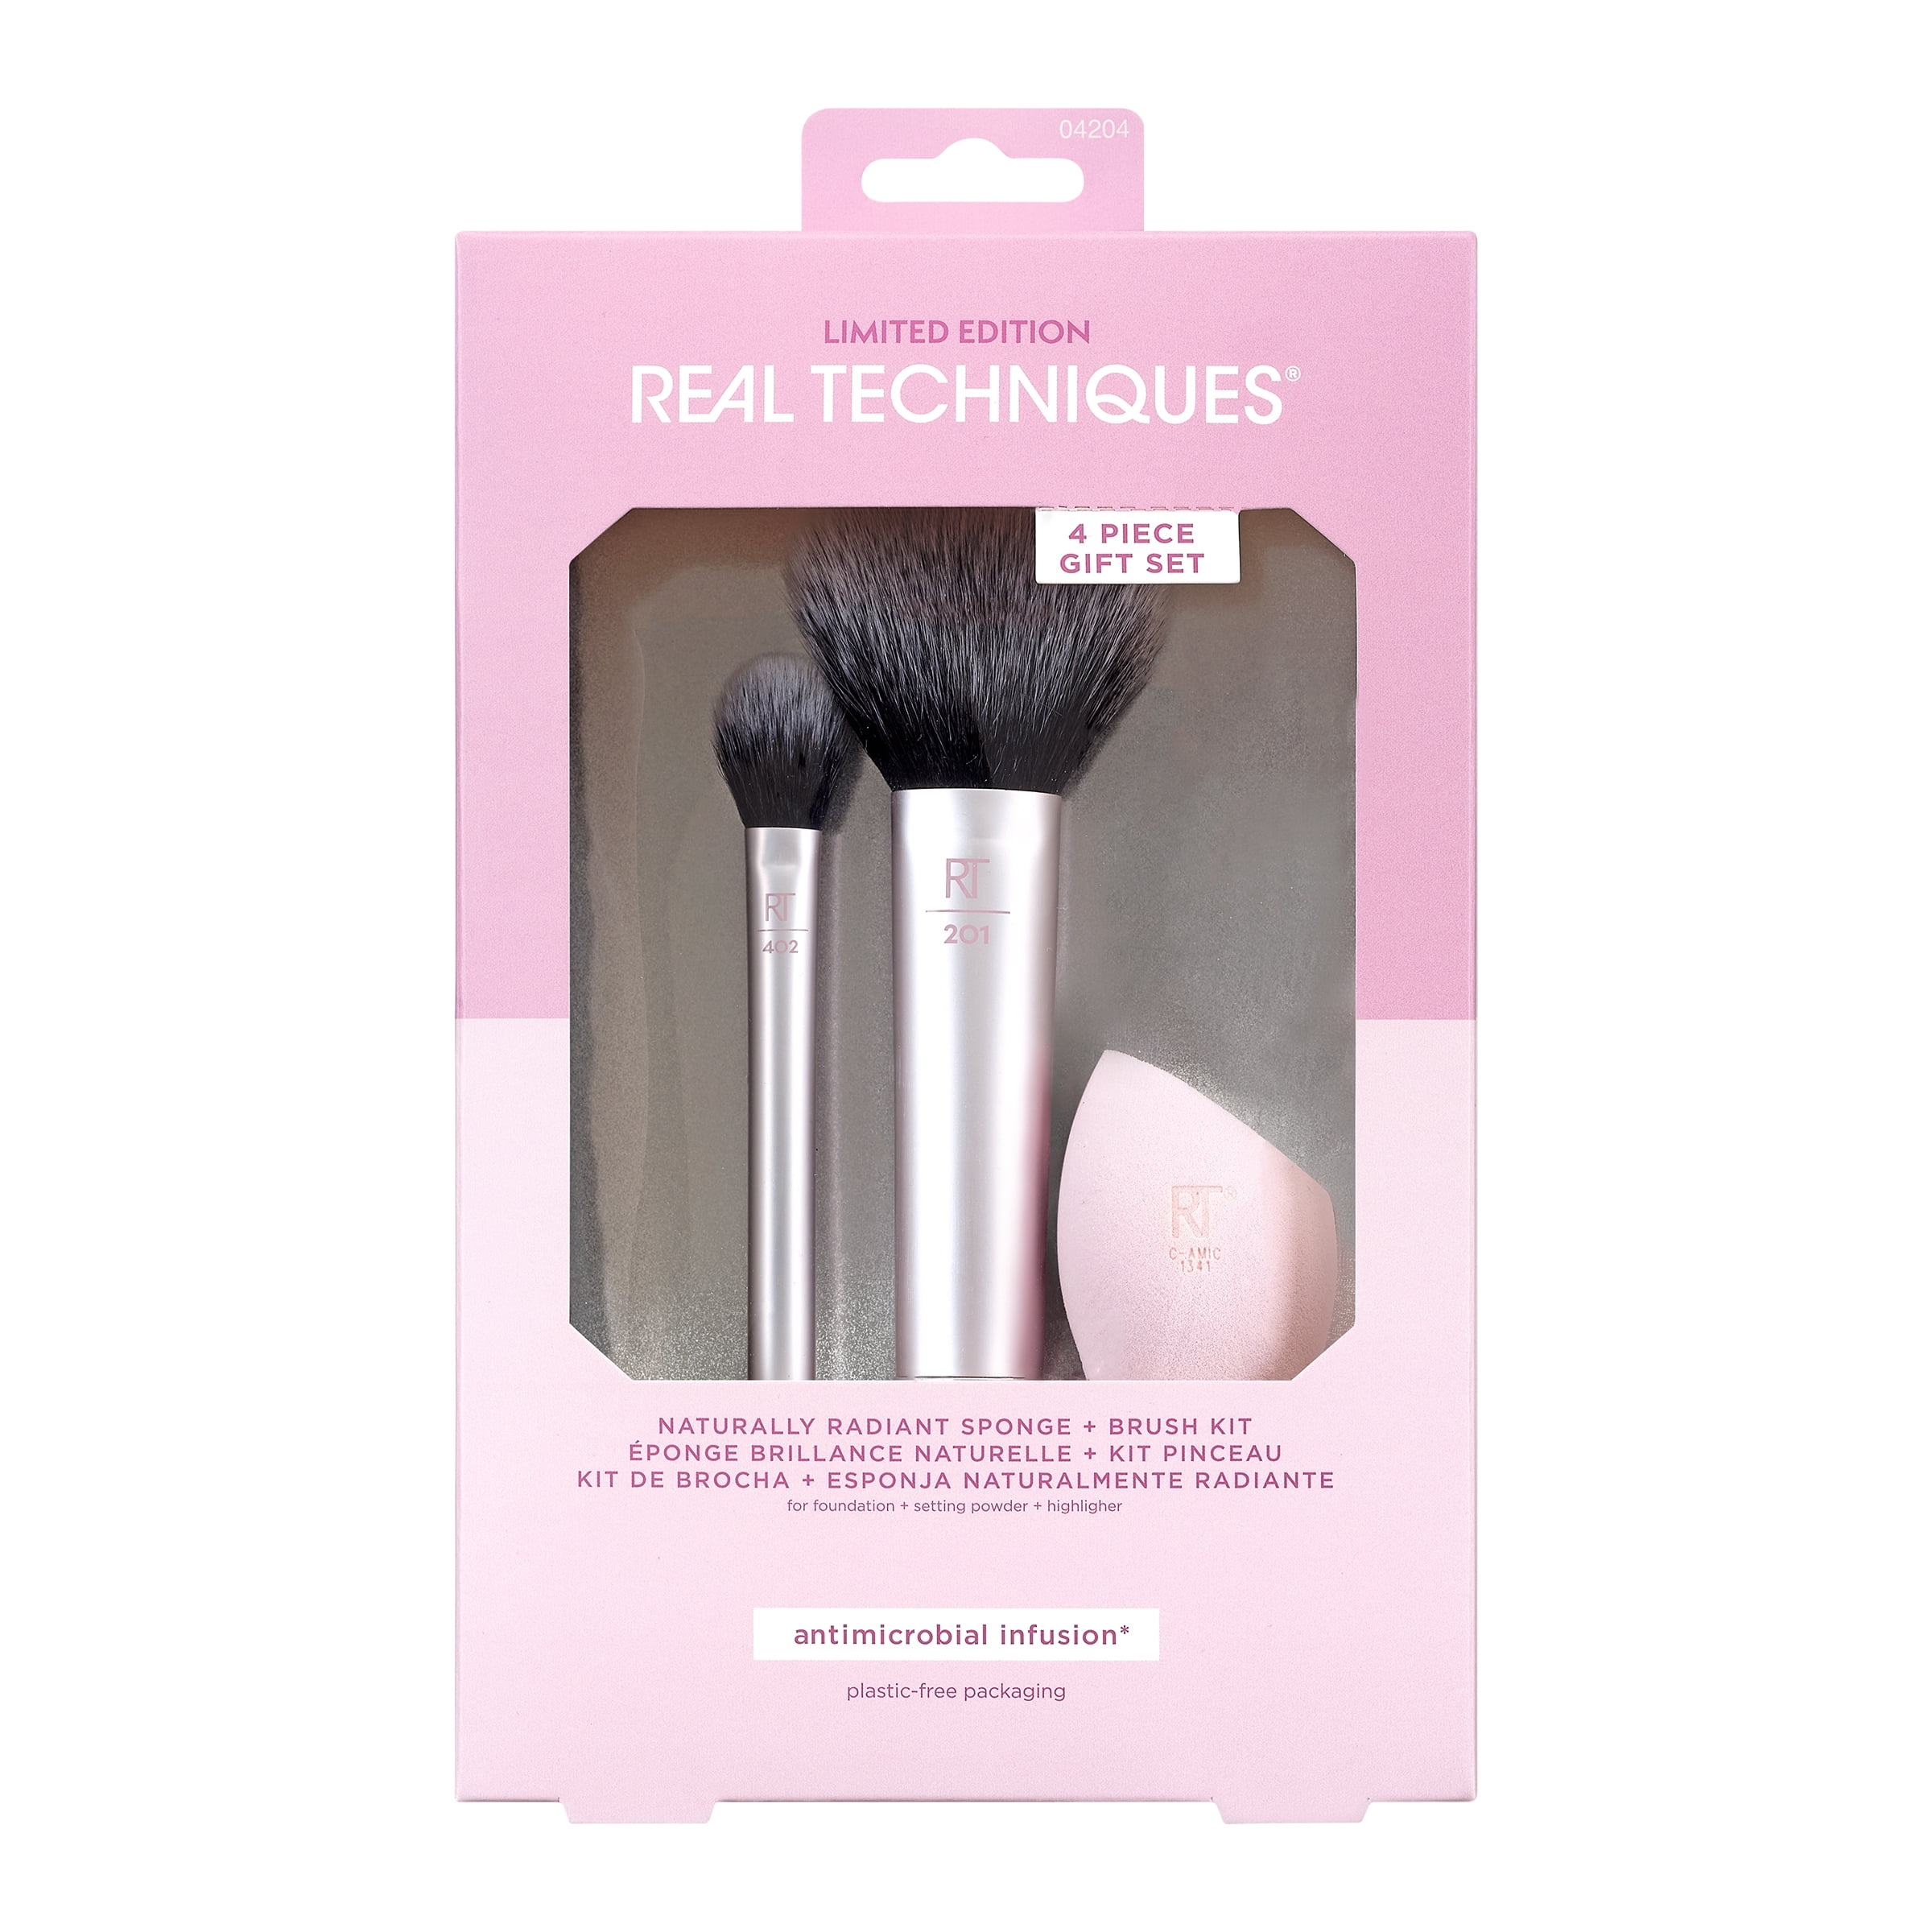 Real Techniques Limited Edition Naturally Radiant Sponge Brush Kit, 4 Piece Gift Set - Walmart.com